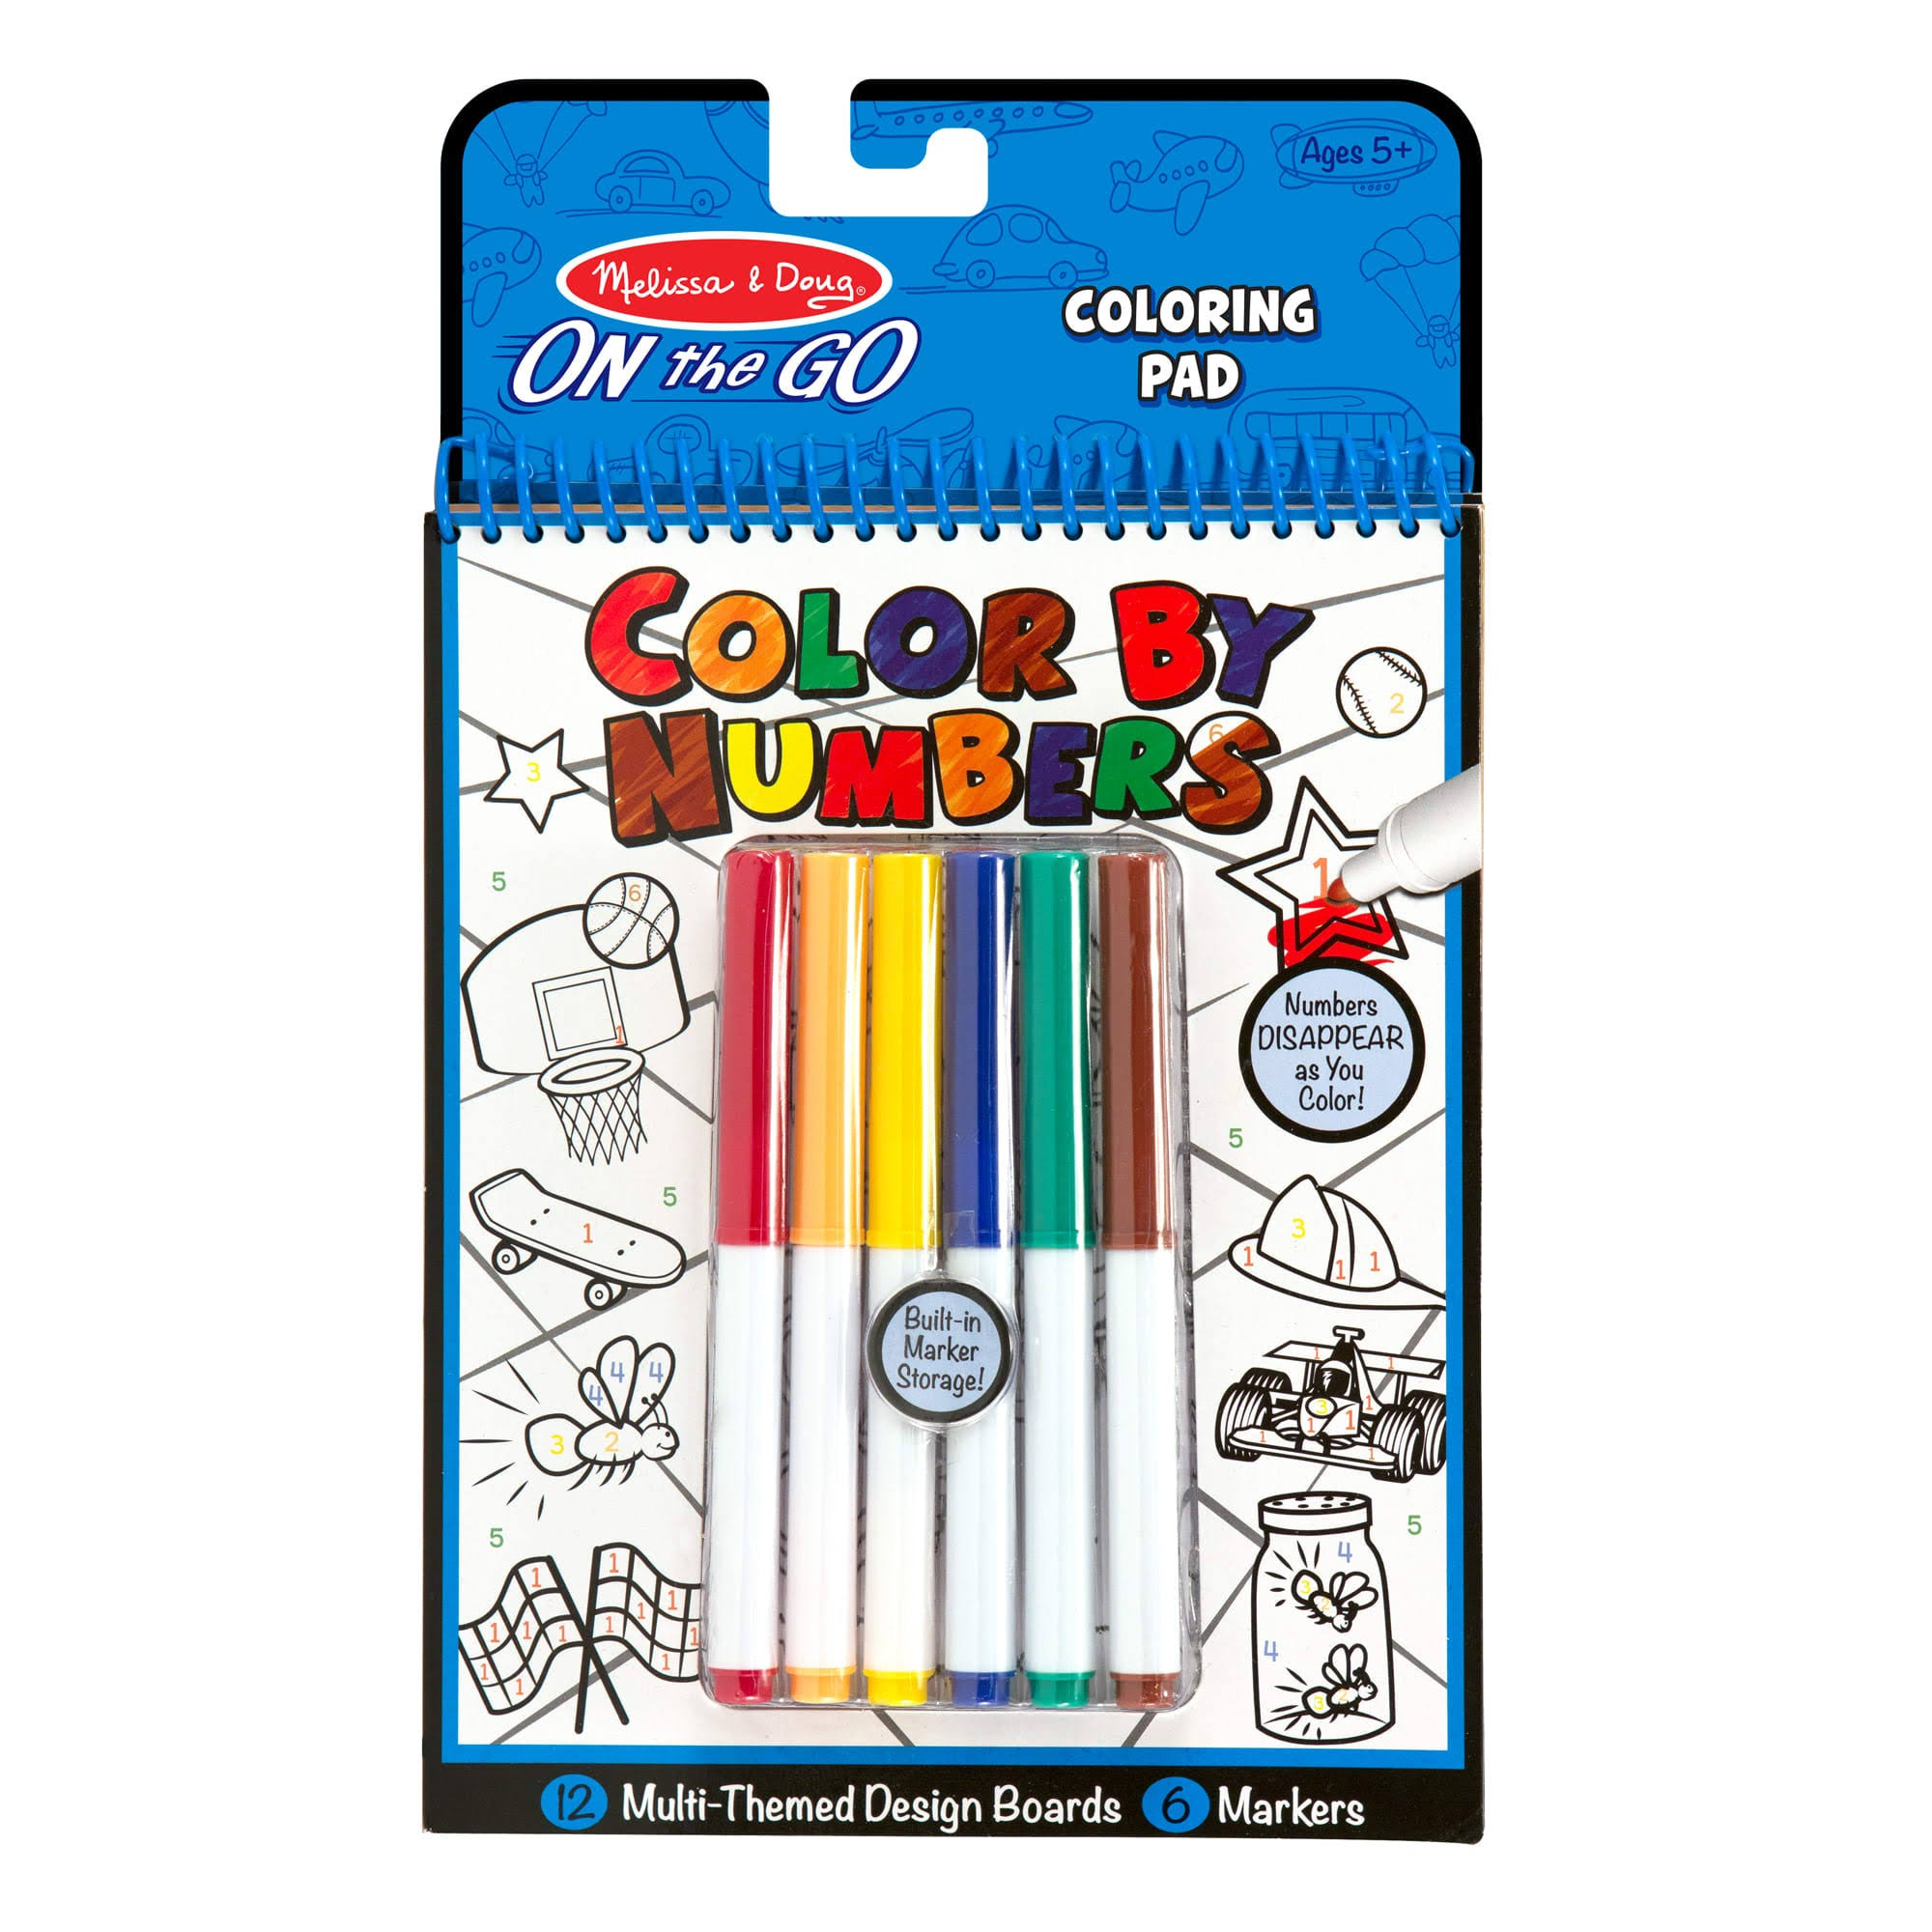 Melissa & Doug On the Go Color by Numbers Coloring Book - Blue